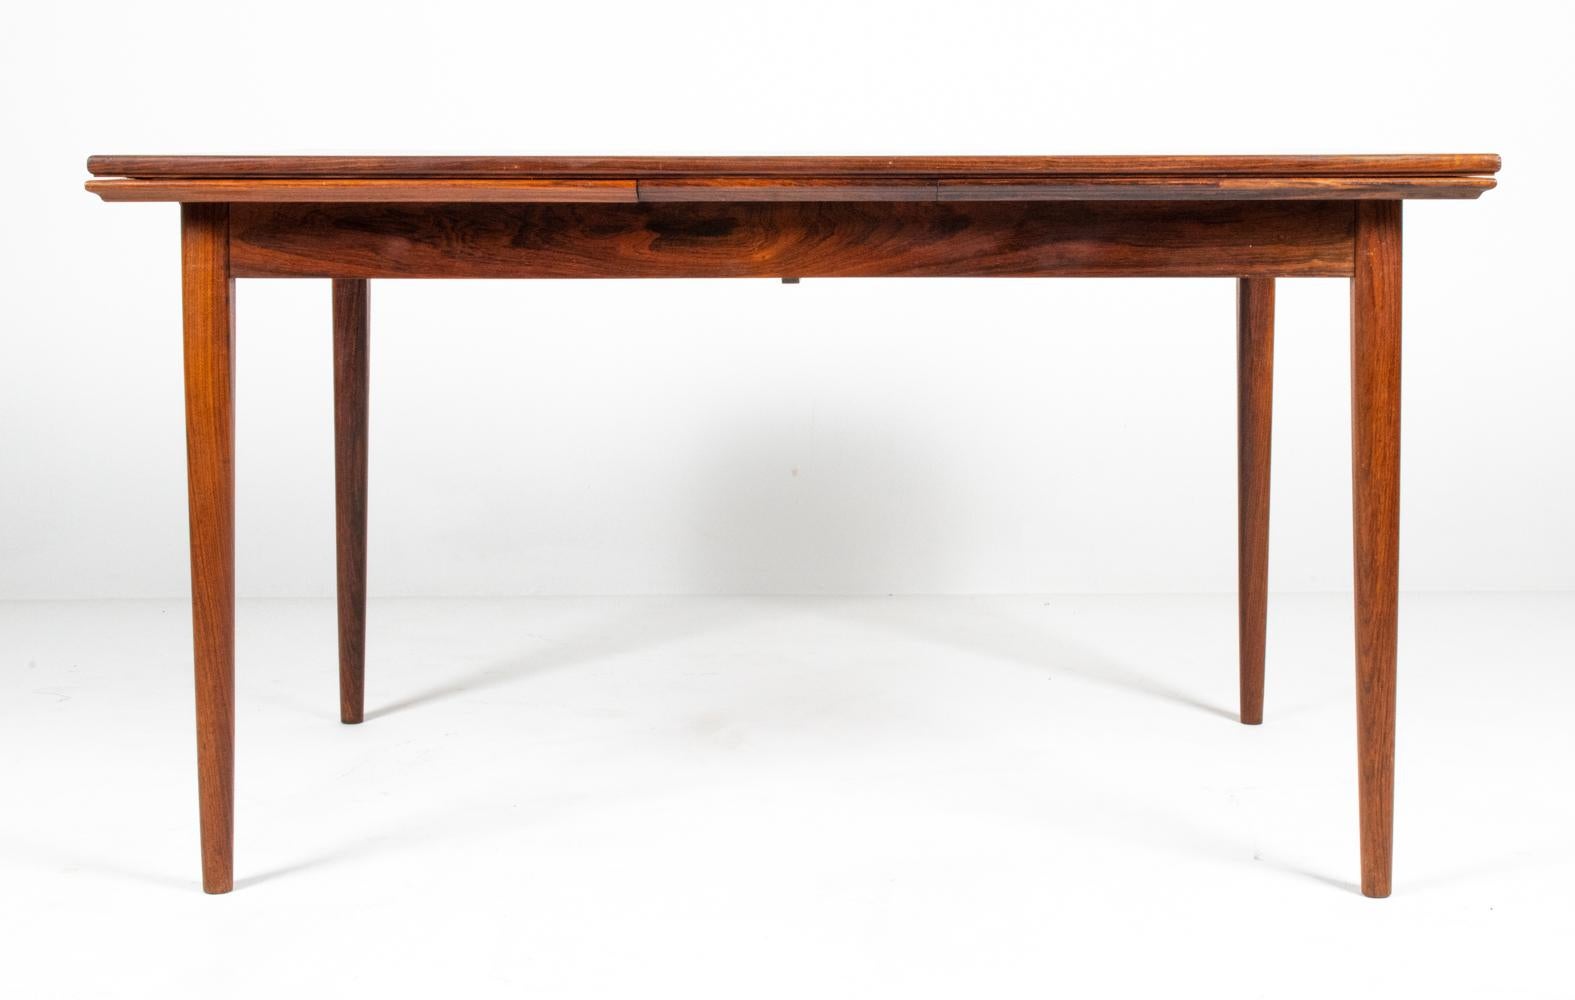 Danish Mid-Century Rosewood Extension Dining Table, c. 1960's For Sale 4